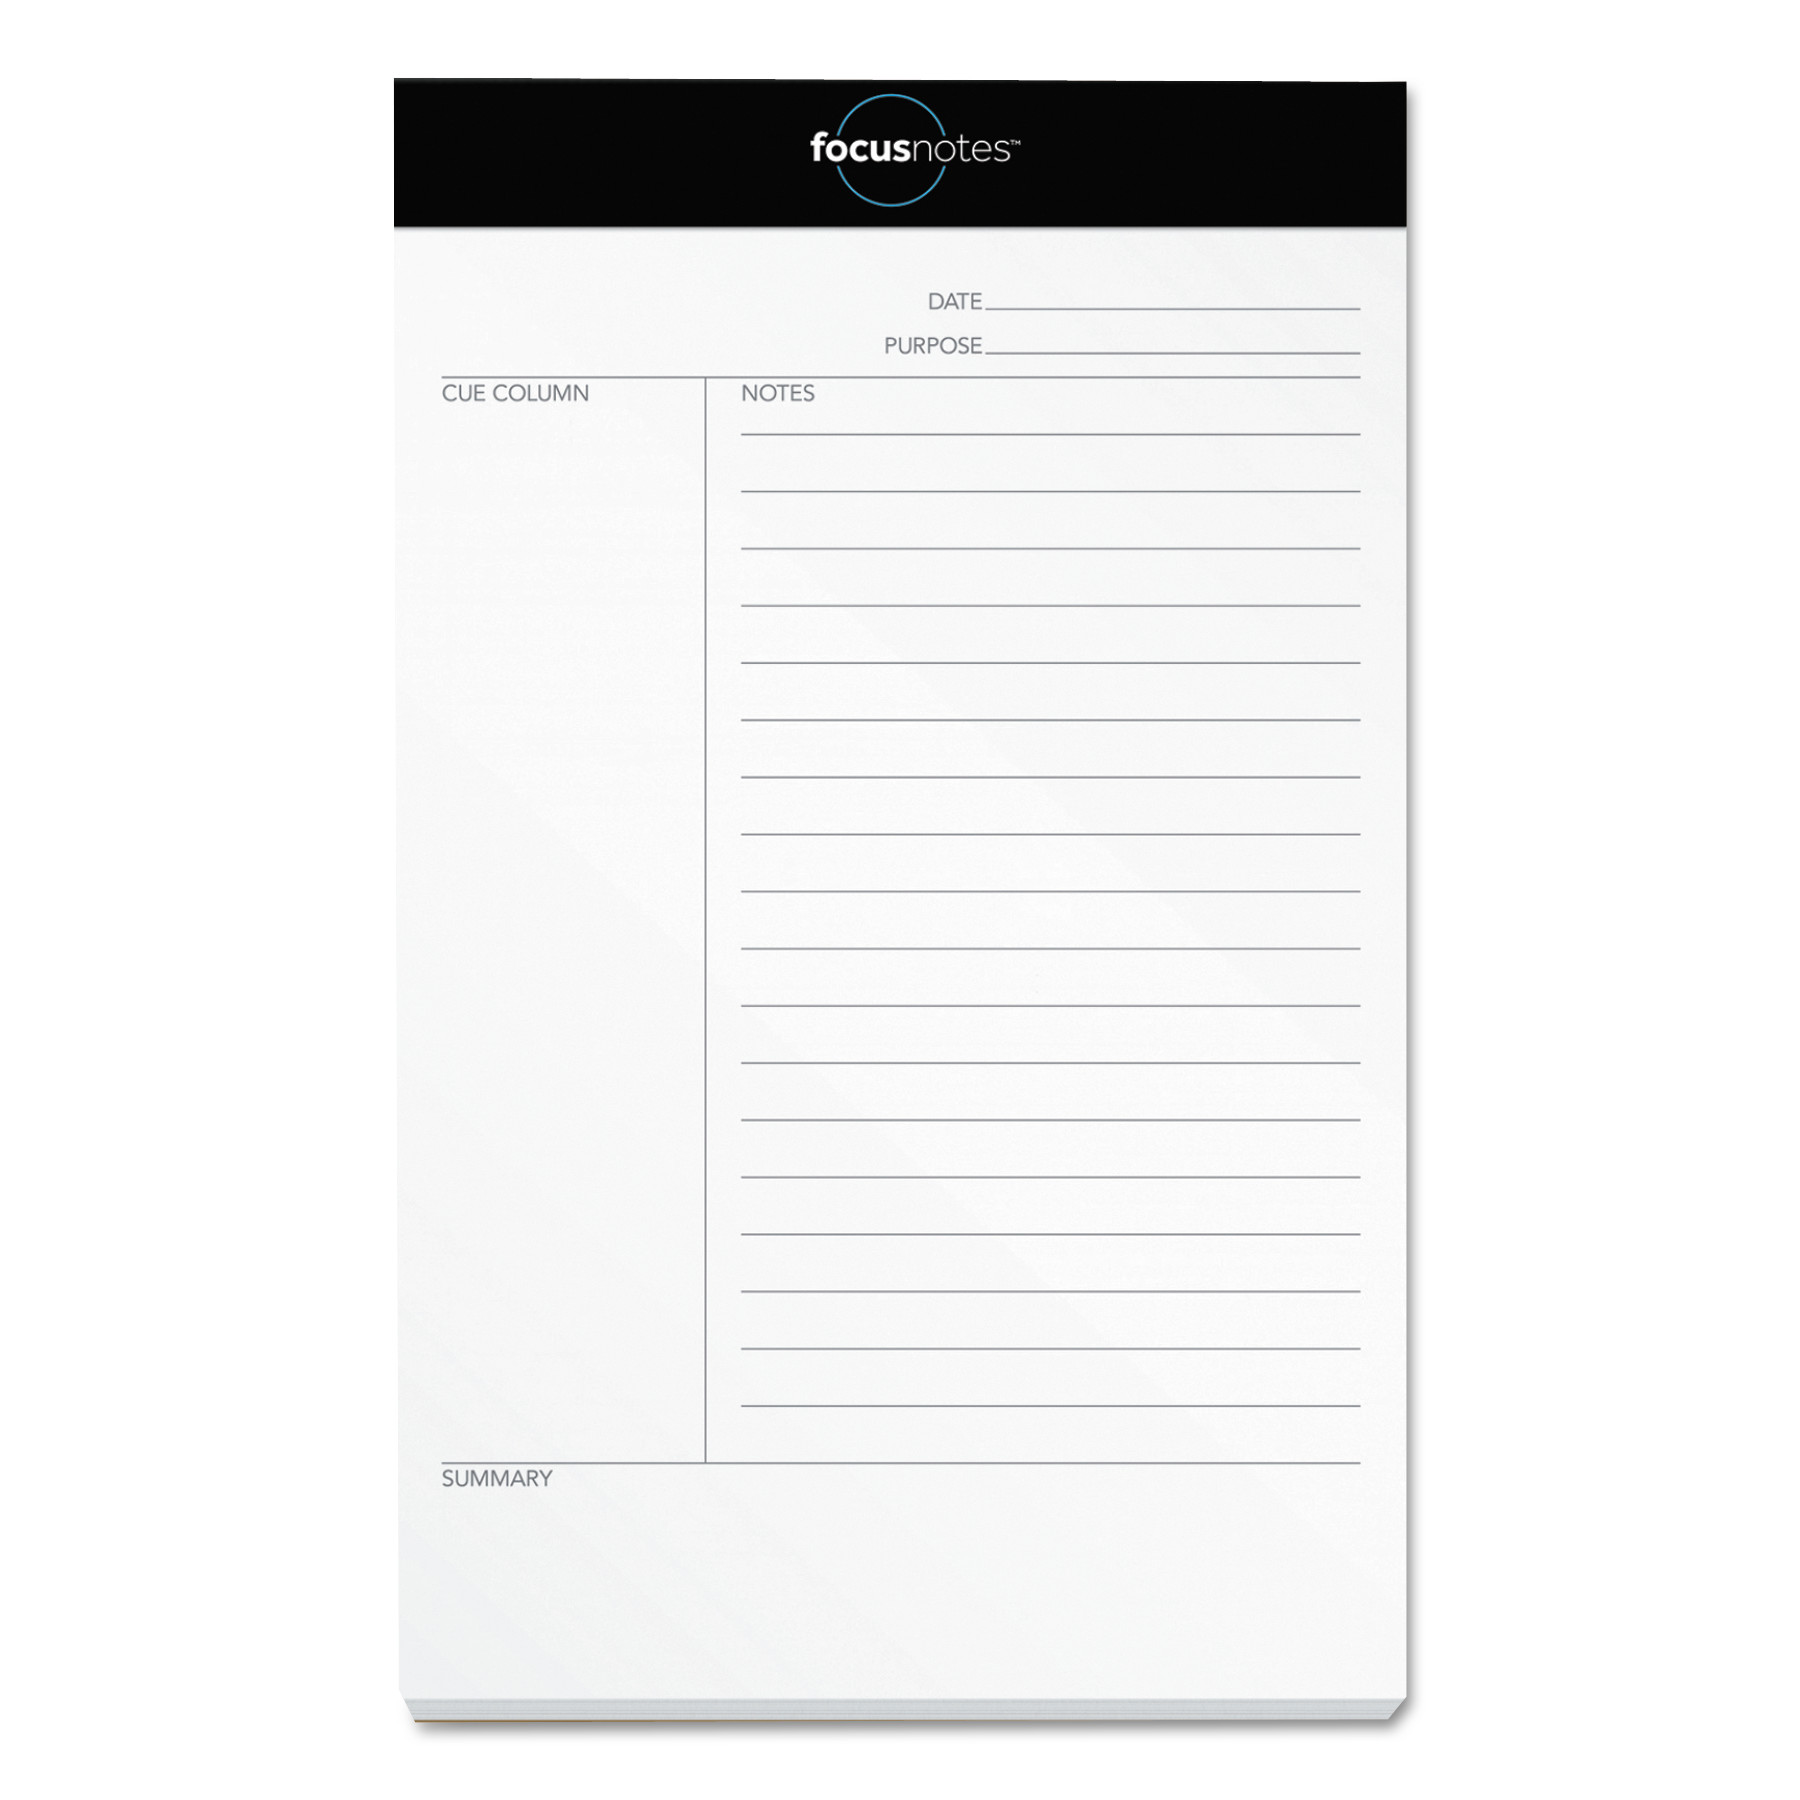  TOPS 77153 FocusNotes Legal Pad, Meeting Notes, 5 x 8, White, 50 Sheets (TOP77153) 